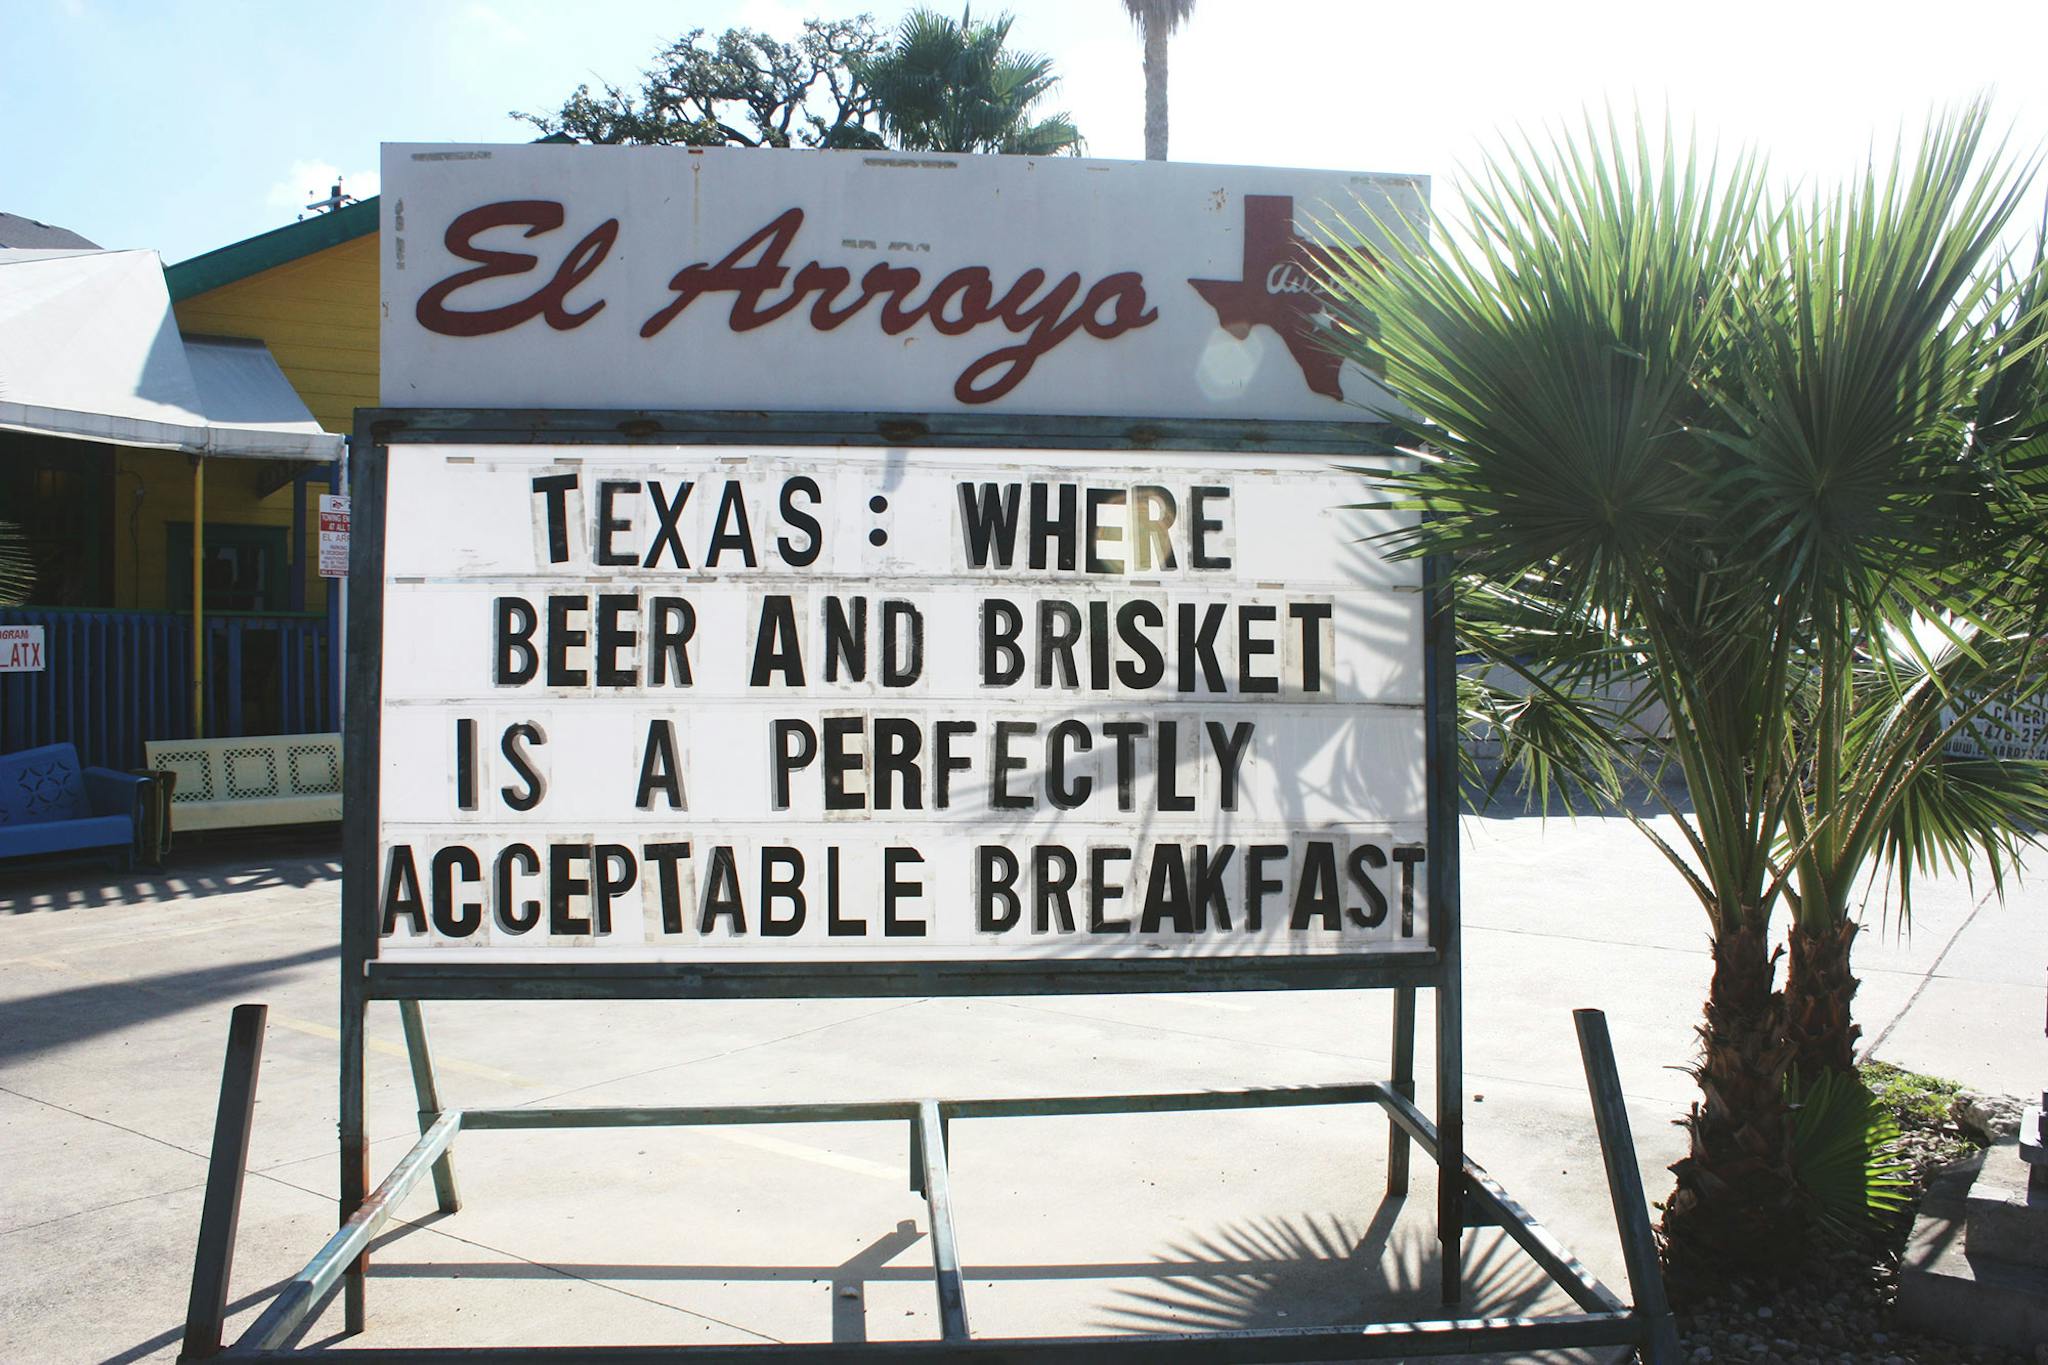 El Arroyo Sign says Texas: Where beer and brisket is a perfectly acceptable breakfast.